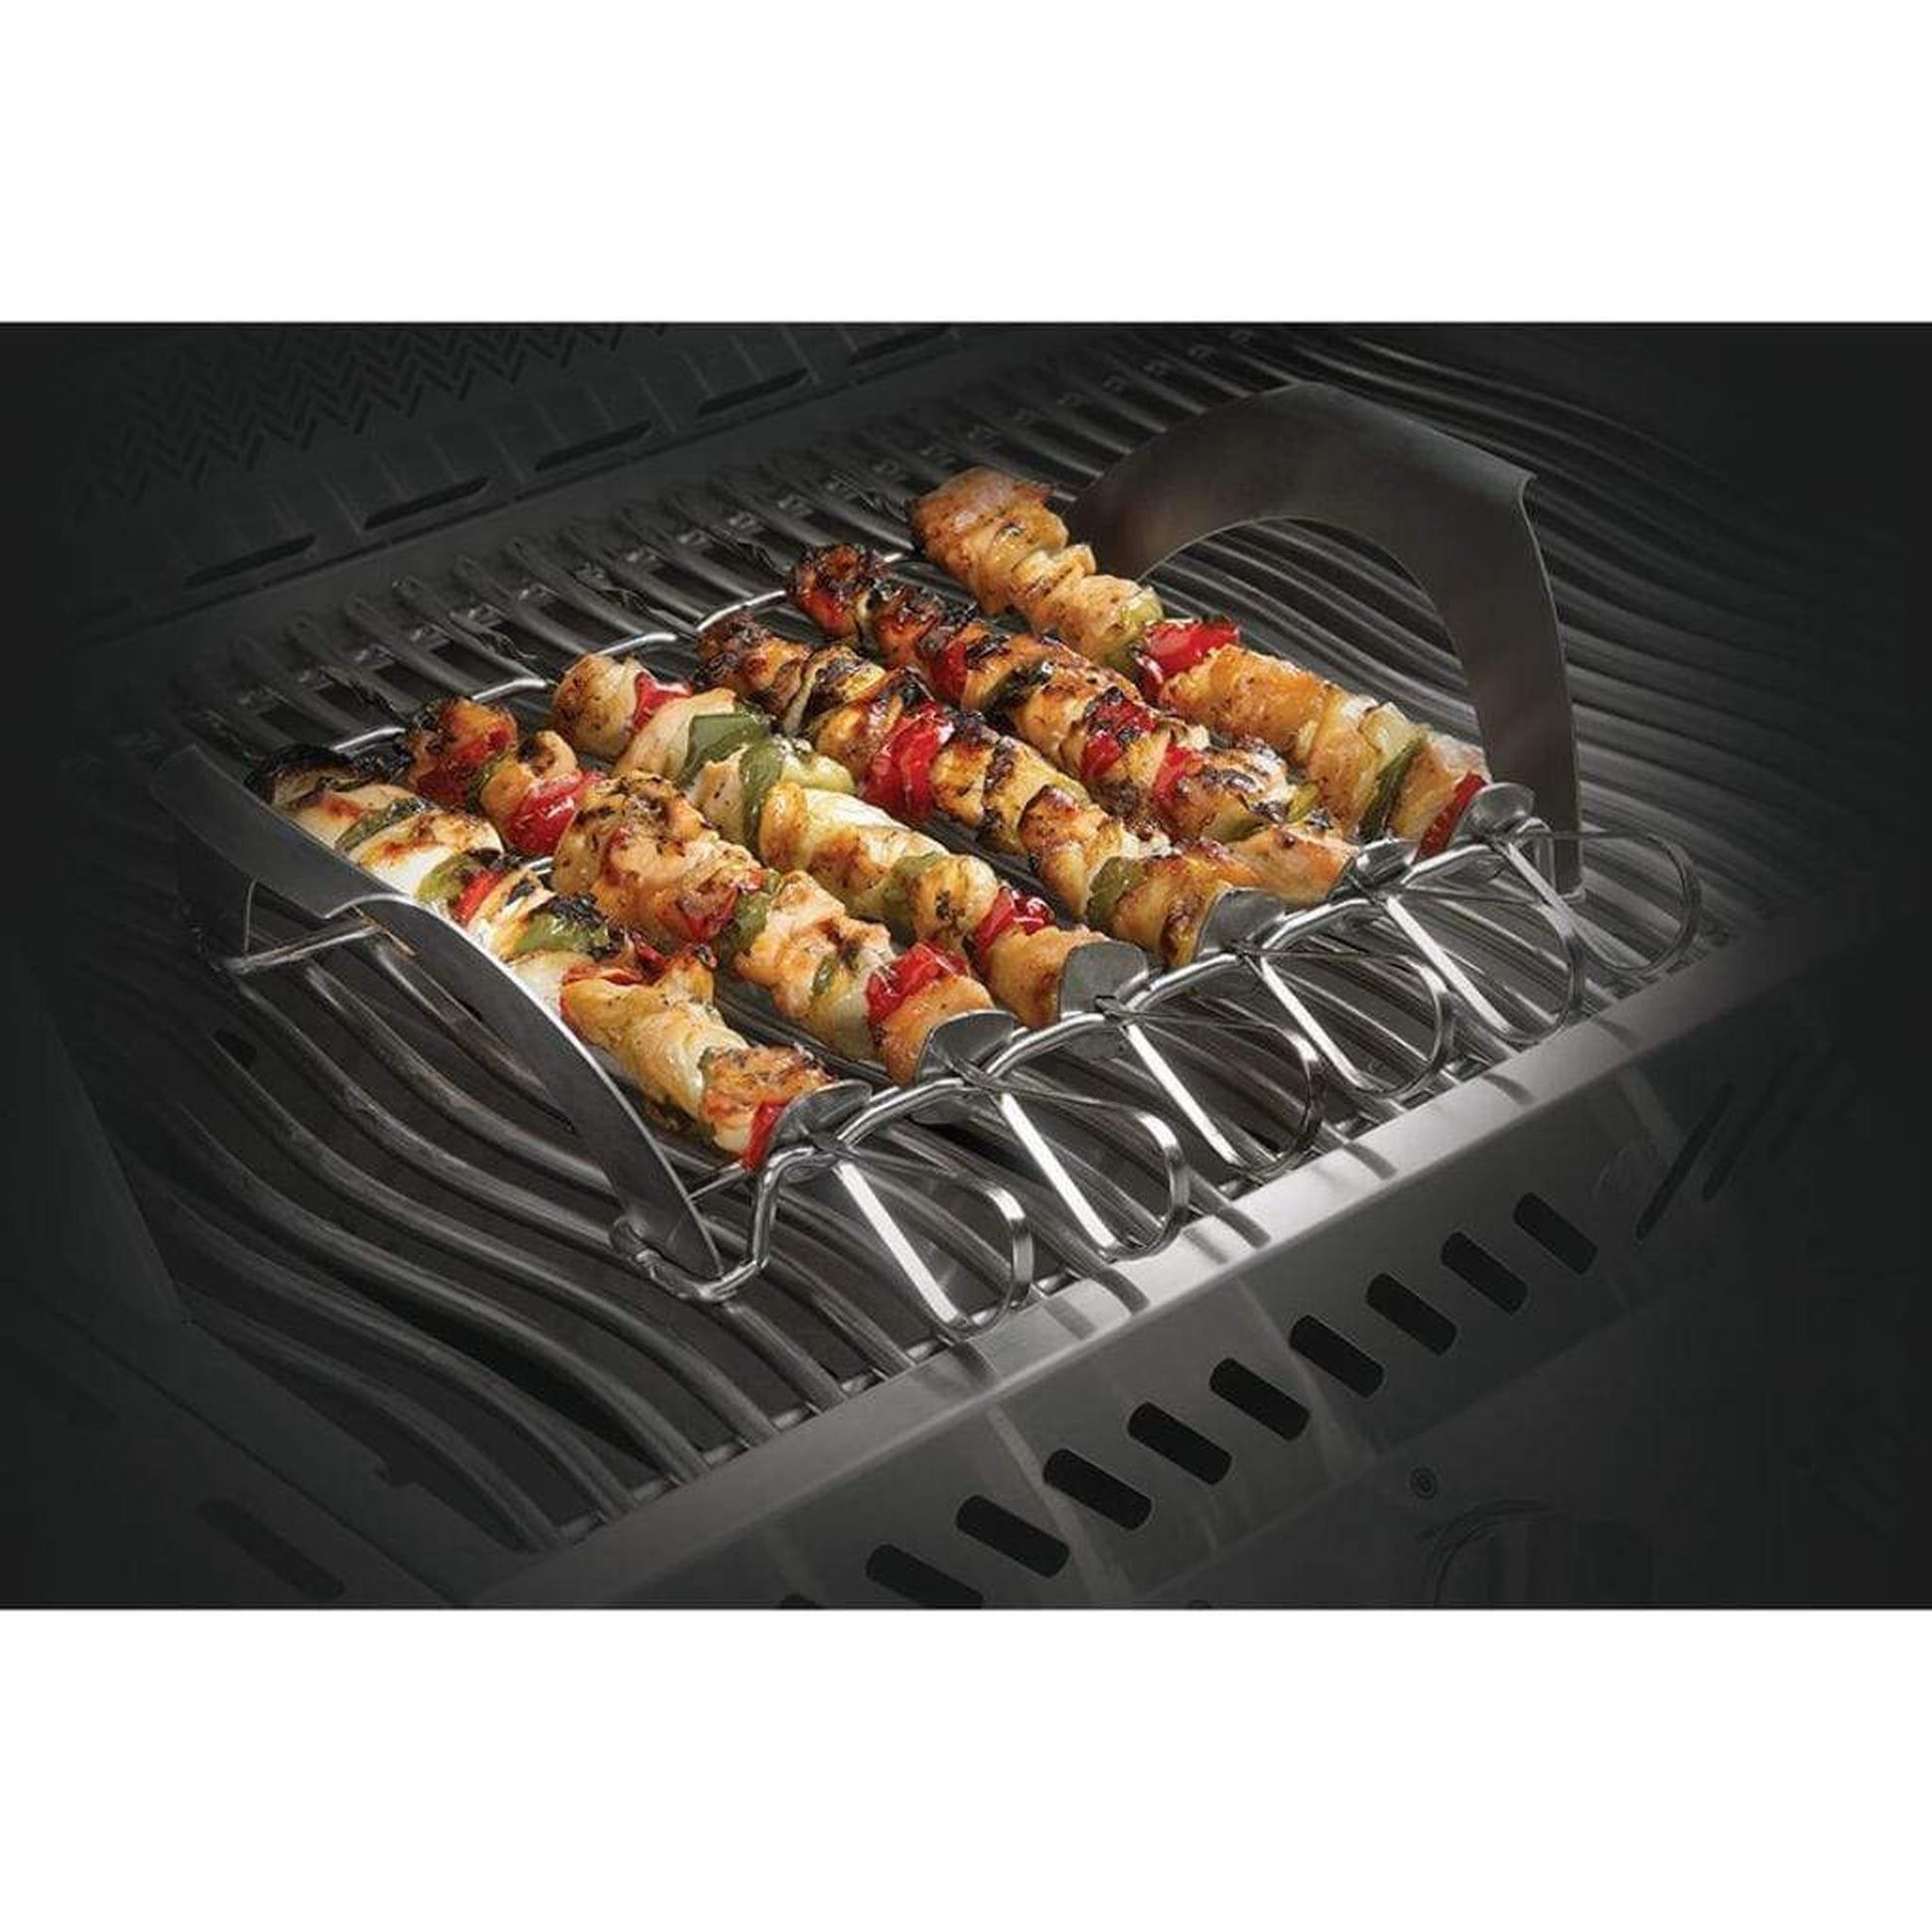 Napoleon 70002 PRO Pizza Stone with Skewers and Rack